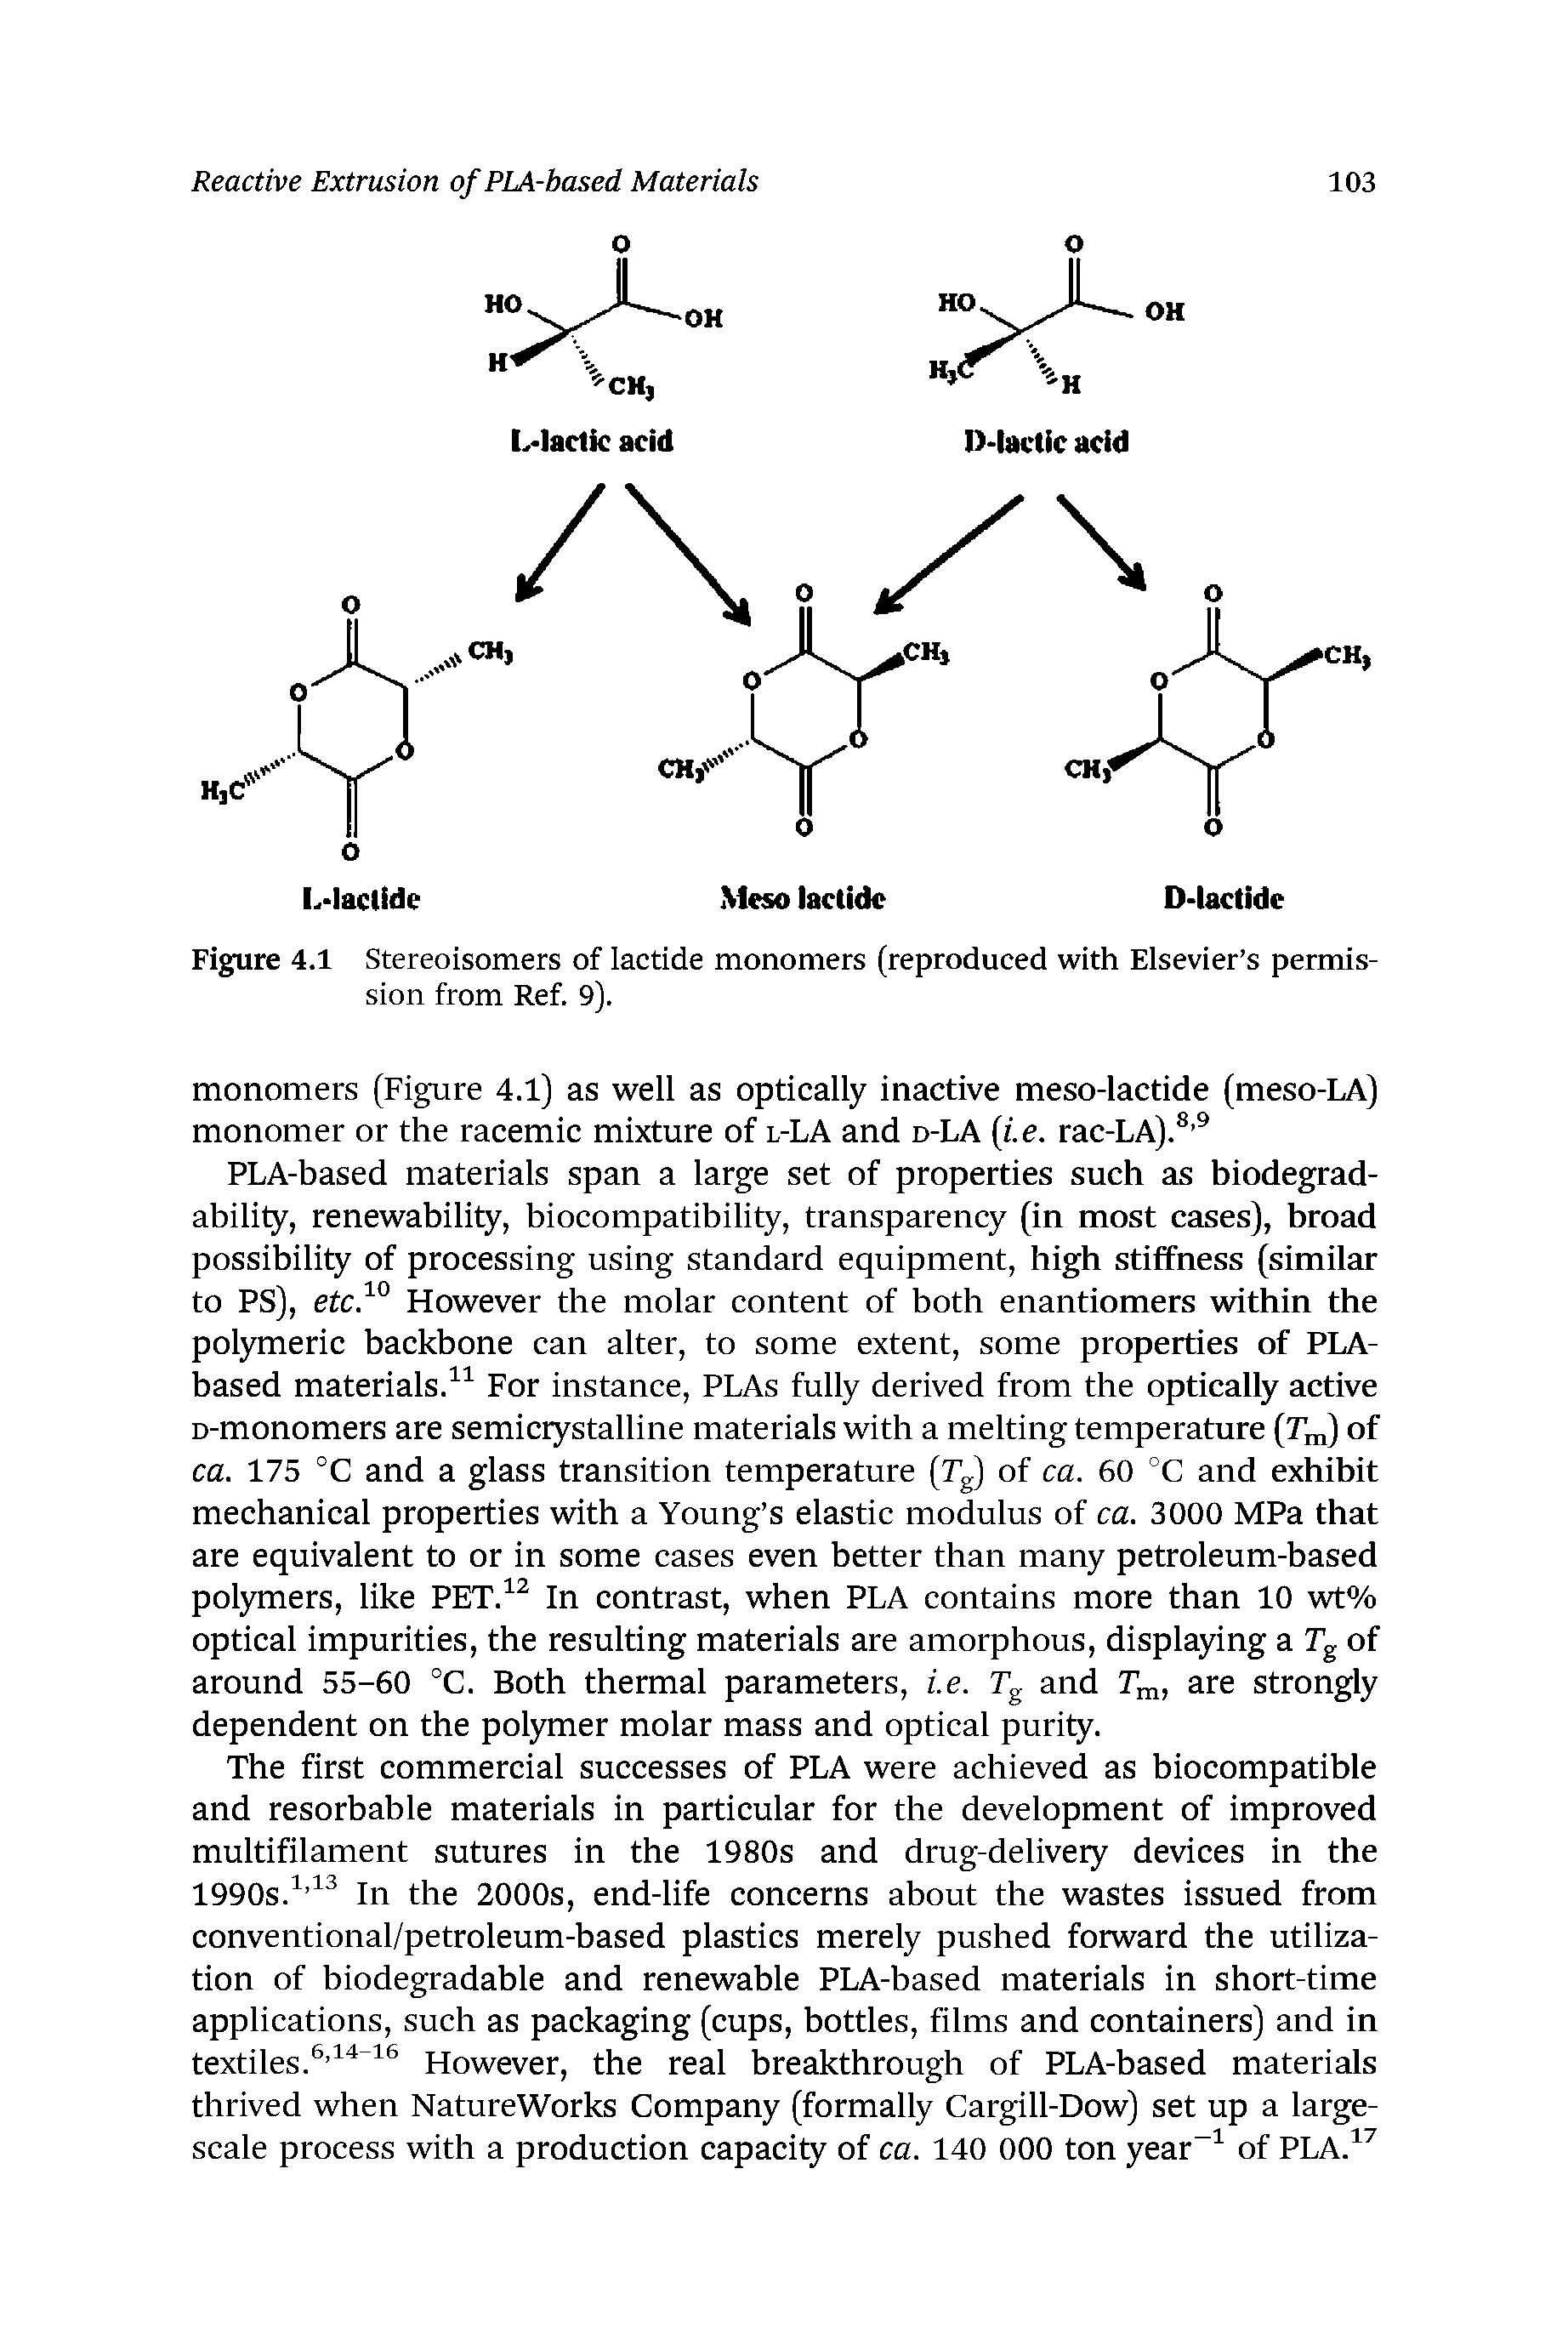 Figure 4.1 Stereoisomers of lactide monomers (reproduced with Elsevier s permission from Ref. 9).